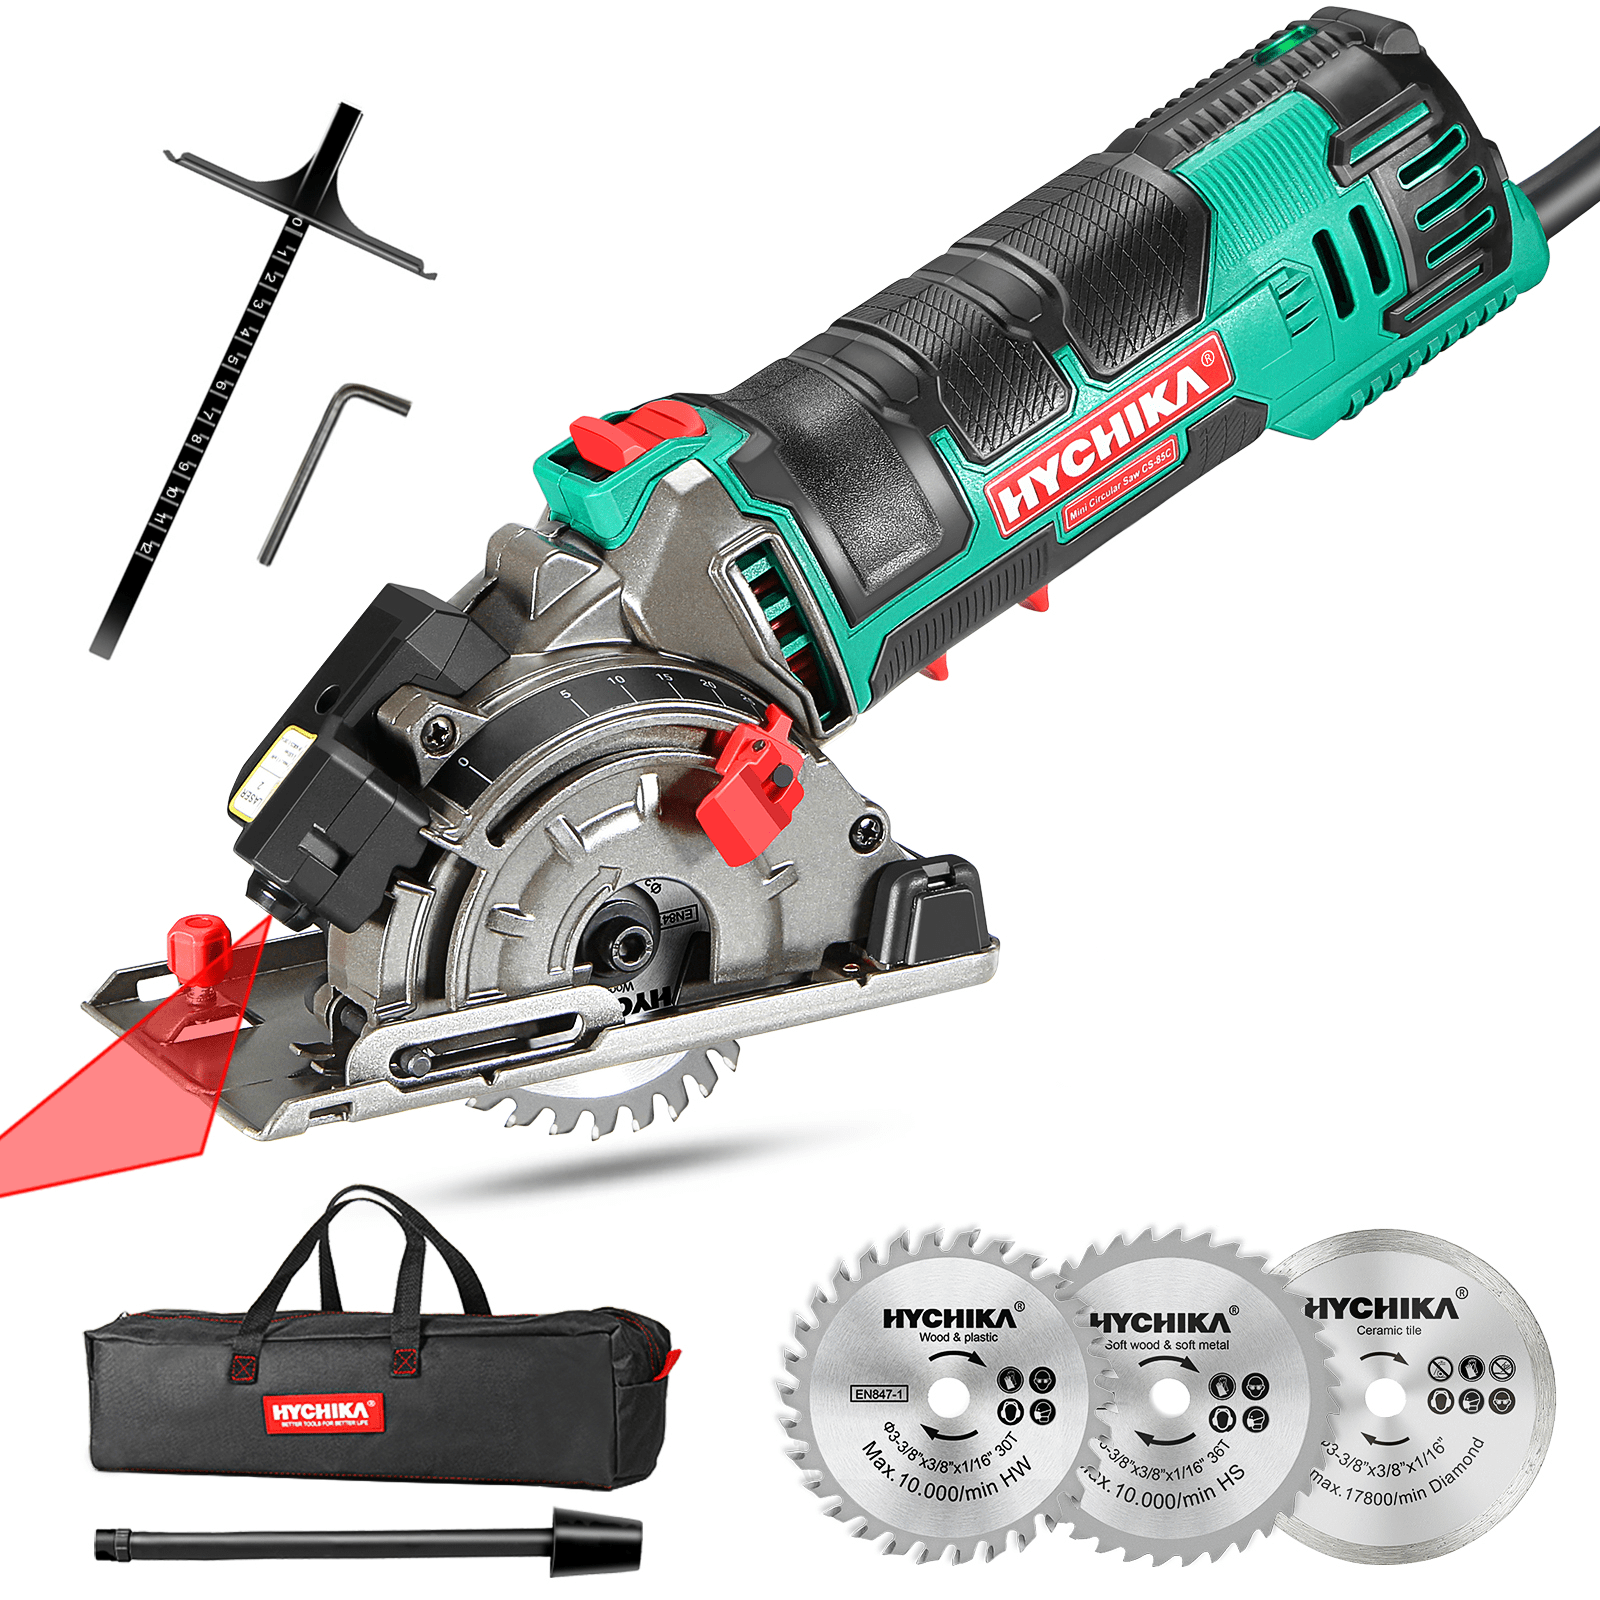 Laatste Ondoorzichtig Barry HYCHIKA Mini Circular Saw 4.0Amp with Laser Guide, 3-3/8” Mini Saw with 3  Saw Blades, Scale Ruler and Pure Copper Motor, Corded - Walmart.com